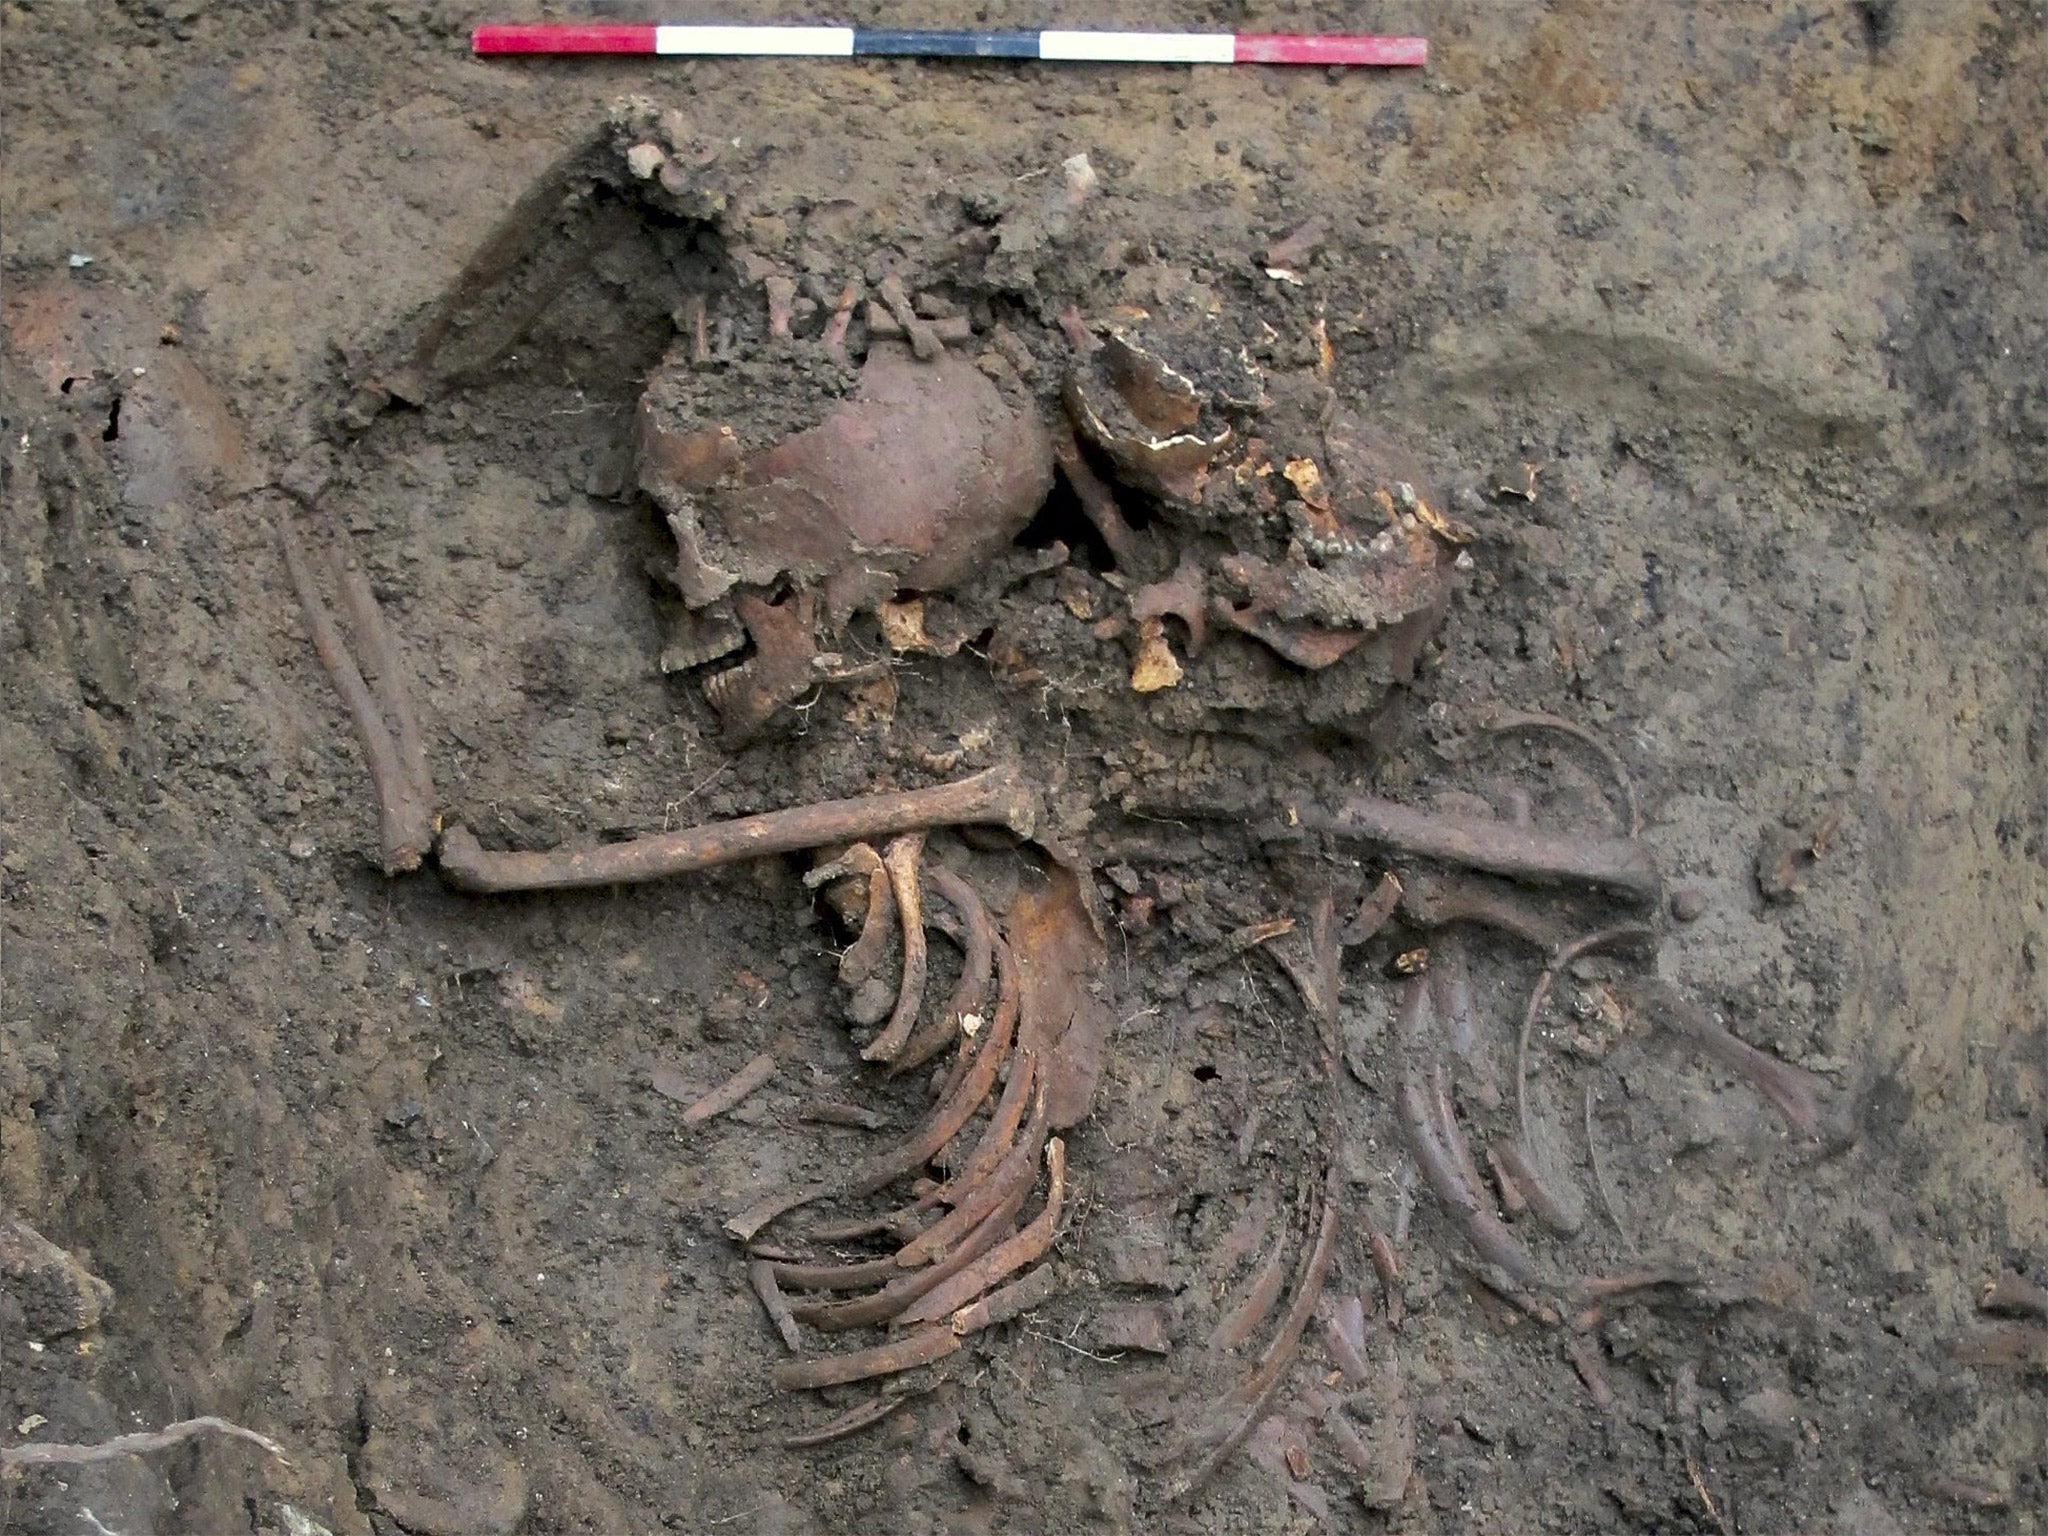 &#13;
The remains of between 17 and 28 Scottish soldiers were discovered in 2013 in two mass graves on the site of Durham Castle &#13;